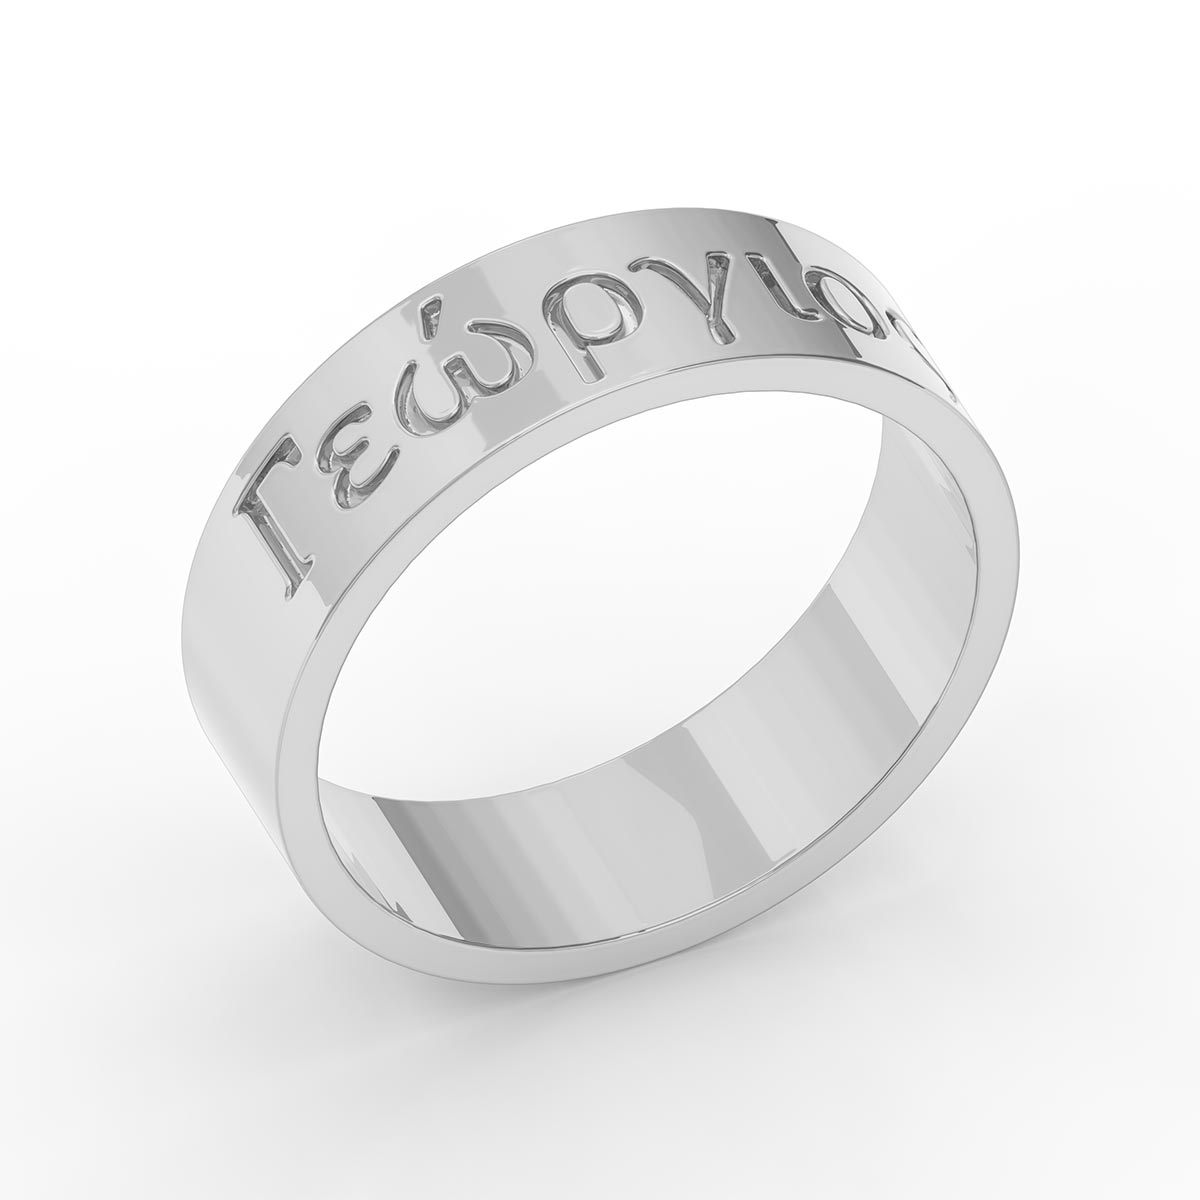 Men's Wide Ring With Greek Name Engraving